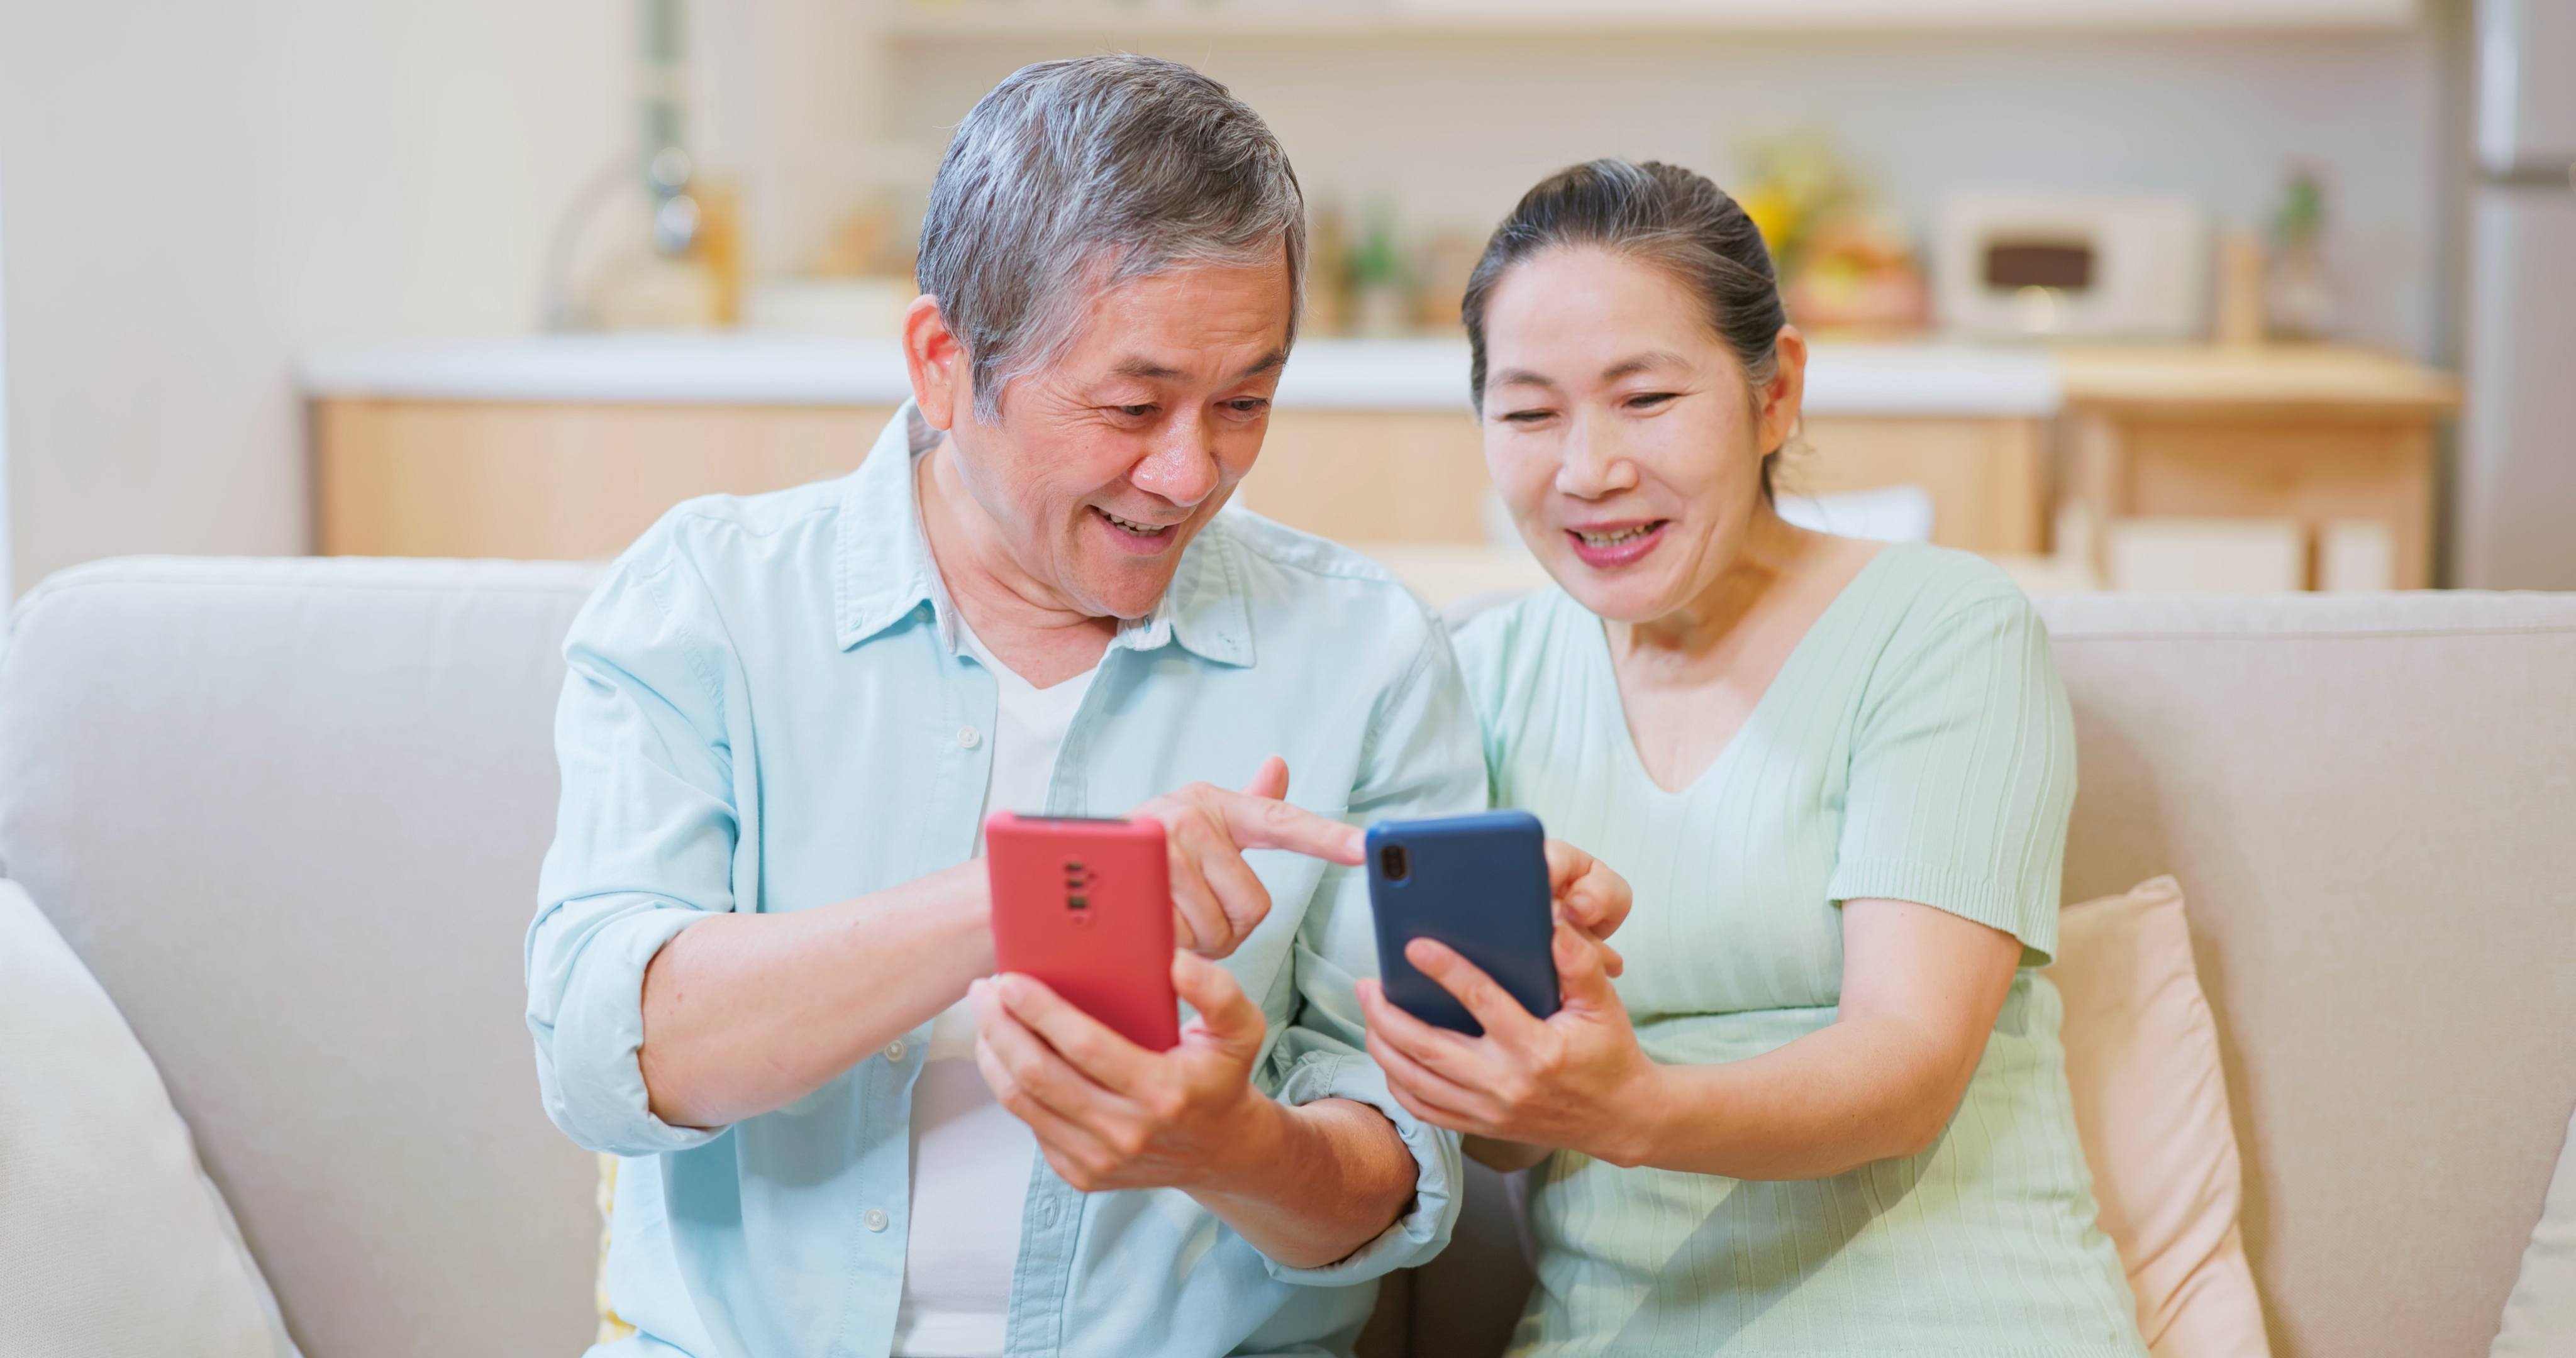 Funding Received for Mobile App by School of Public Health Team to Prevent Dementia in Asian Americans